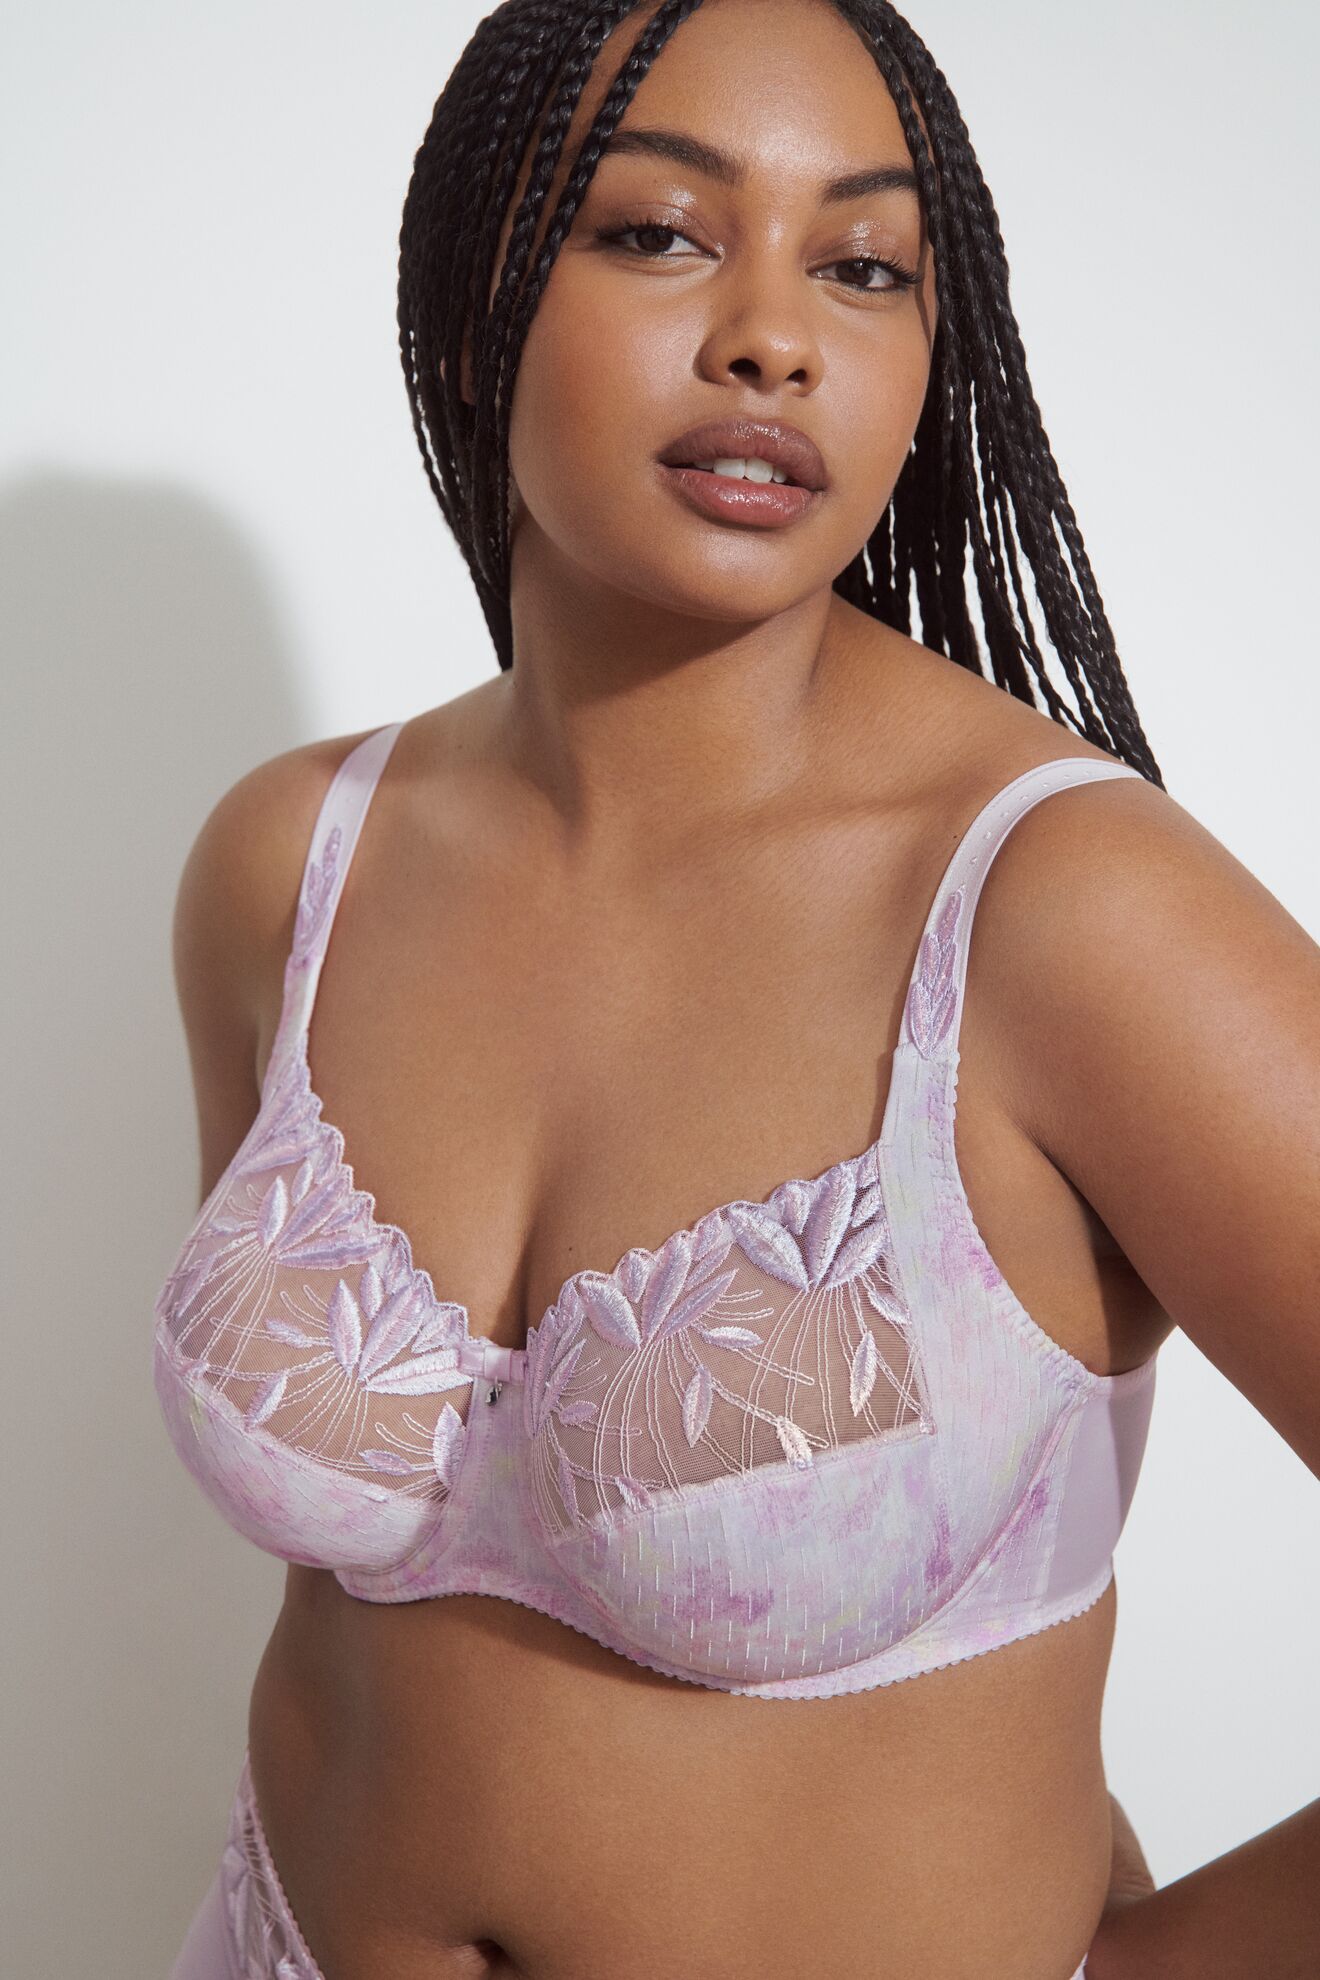 PrimaDonna Orlando Pearly Pink Full Cup Bra